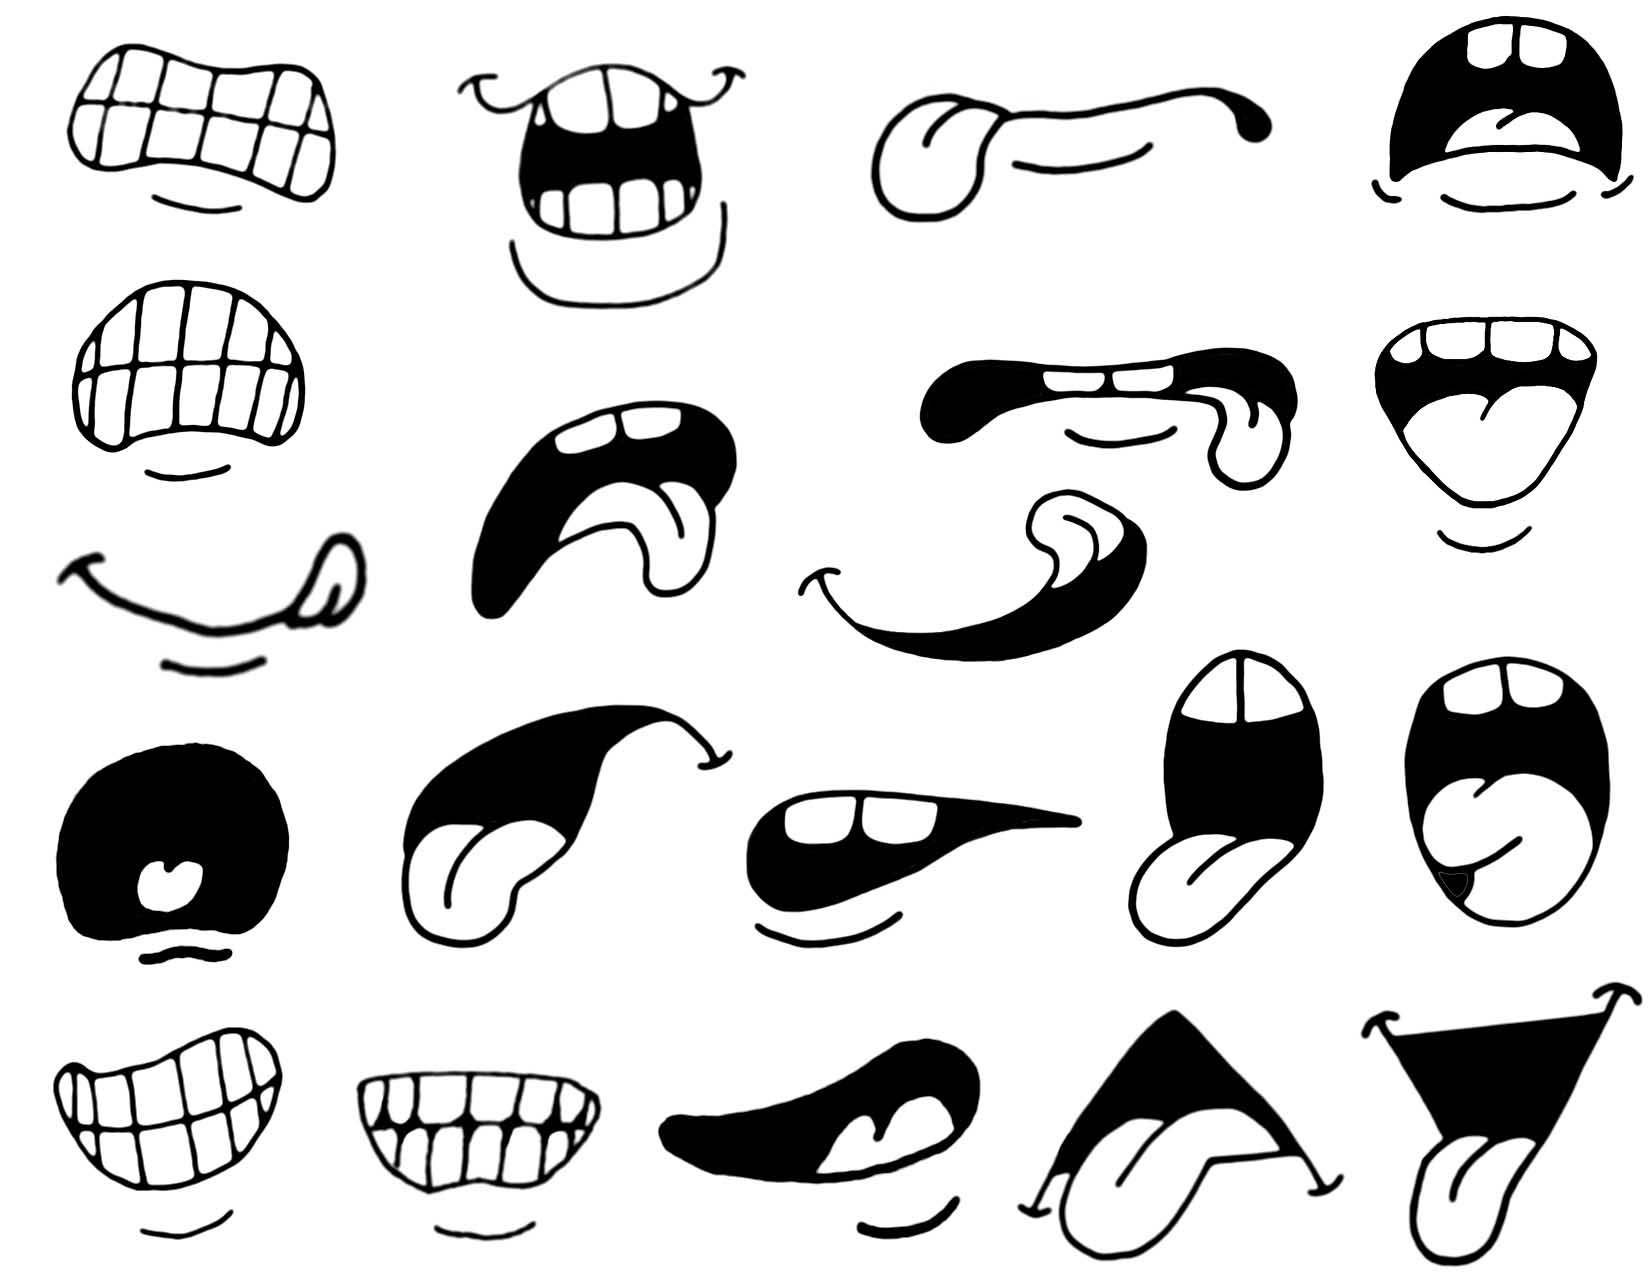 Intermediate mouths slightly more difficult copy